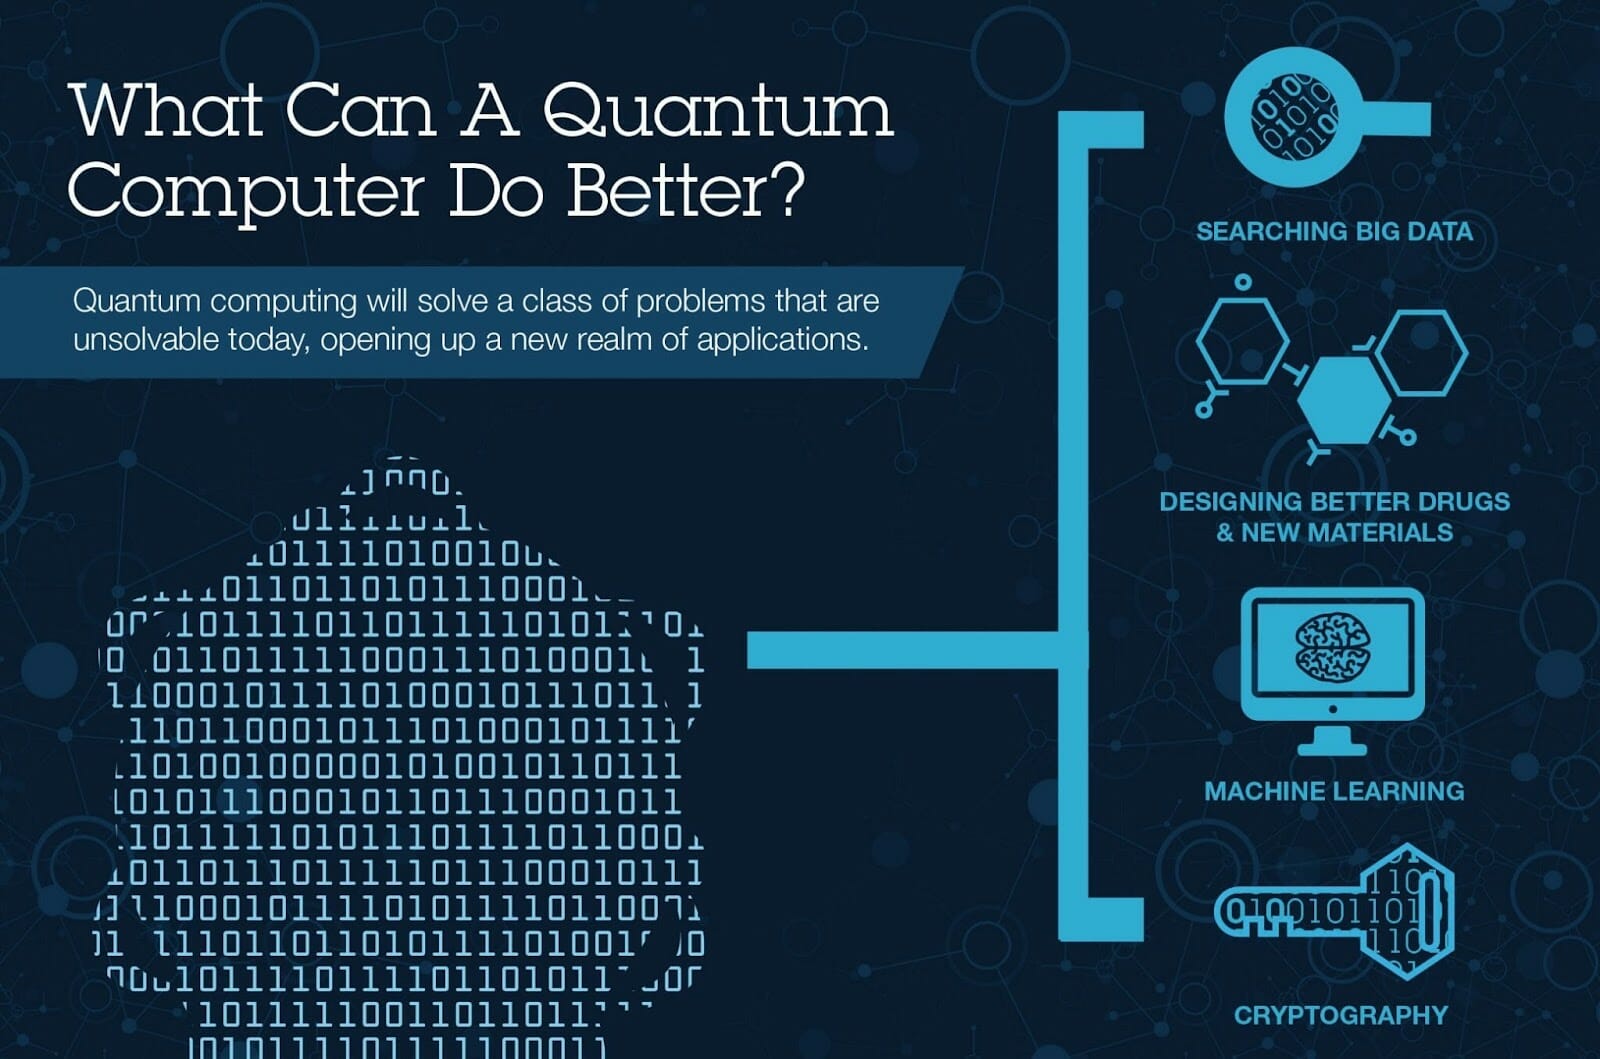 Mini infographic on what can a quantum computer do better